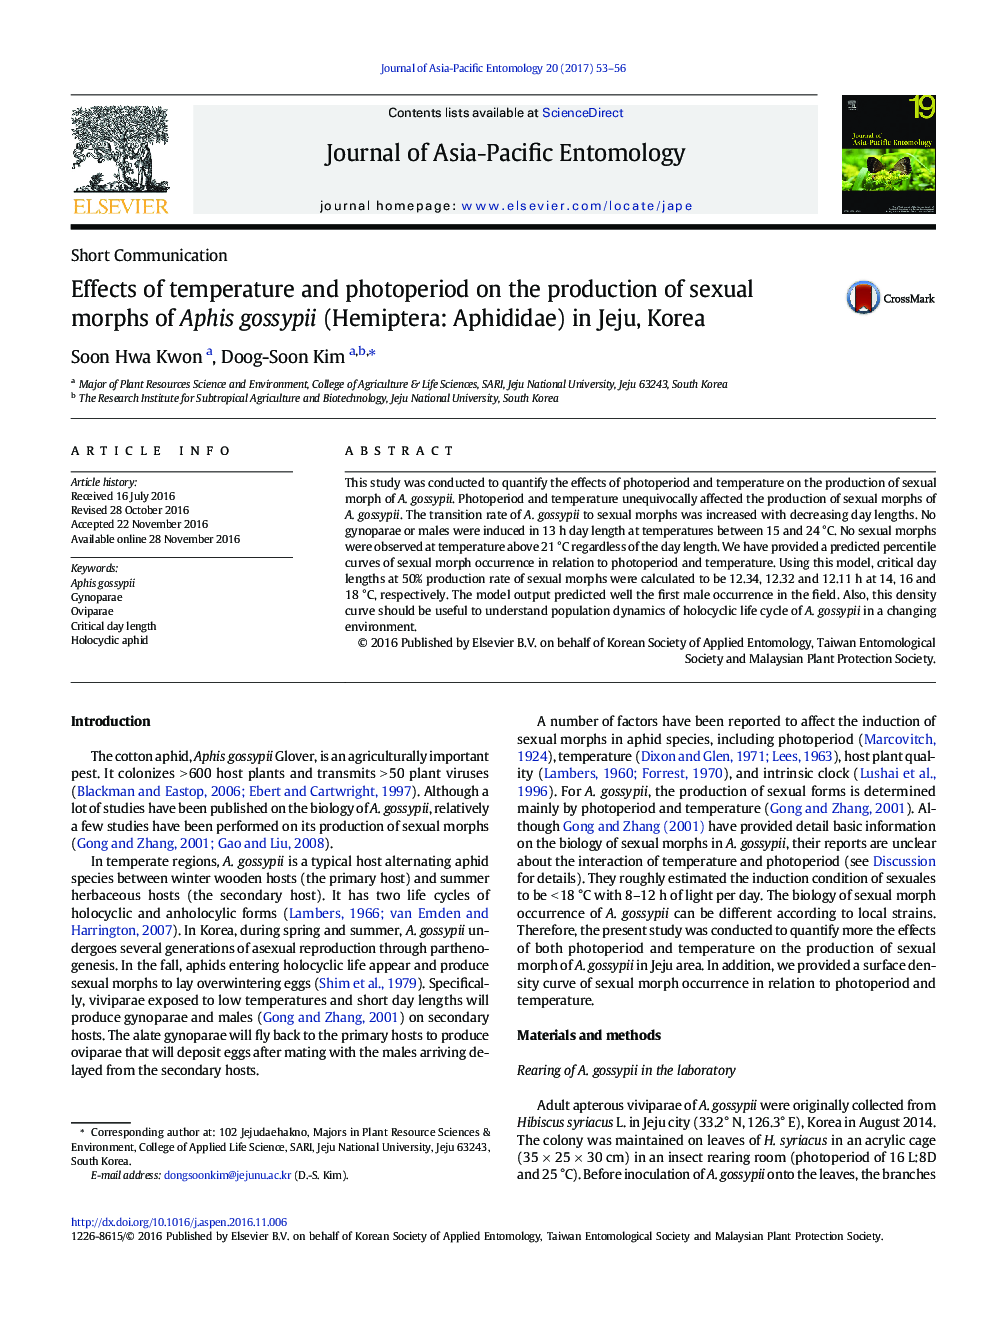 Effects of temperature and photoperiod on the production of sexual morphs of Aphis gossypii (Hemiptera: Aphididae) in Jeju, Korea